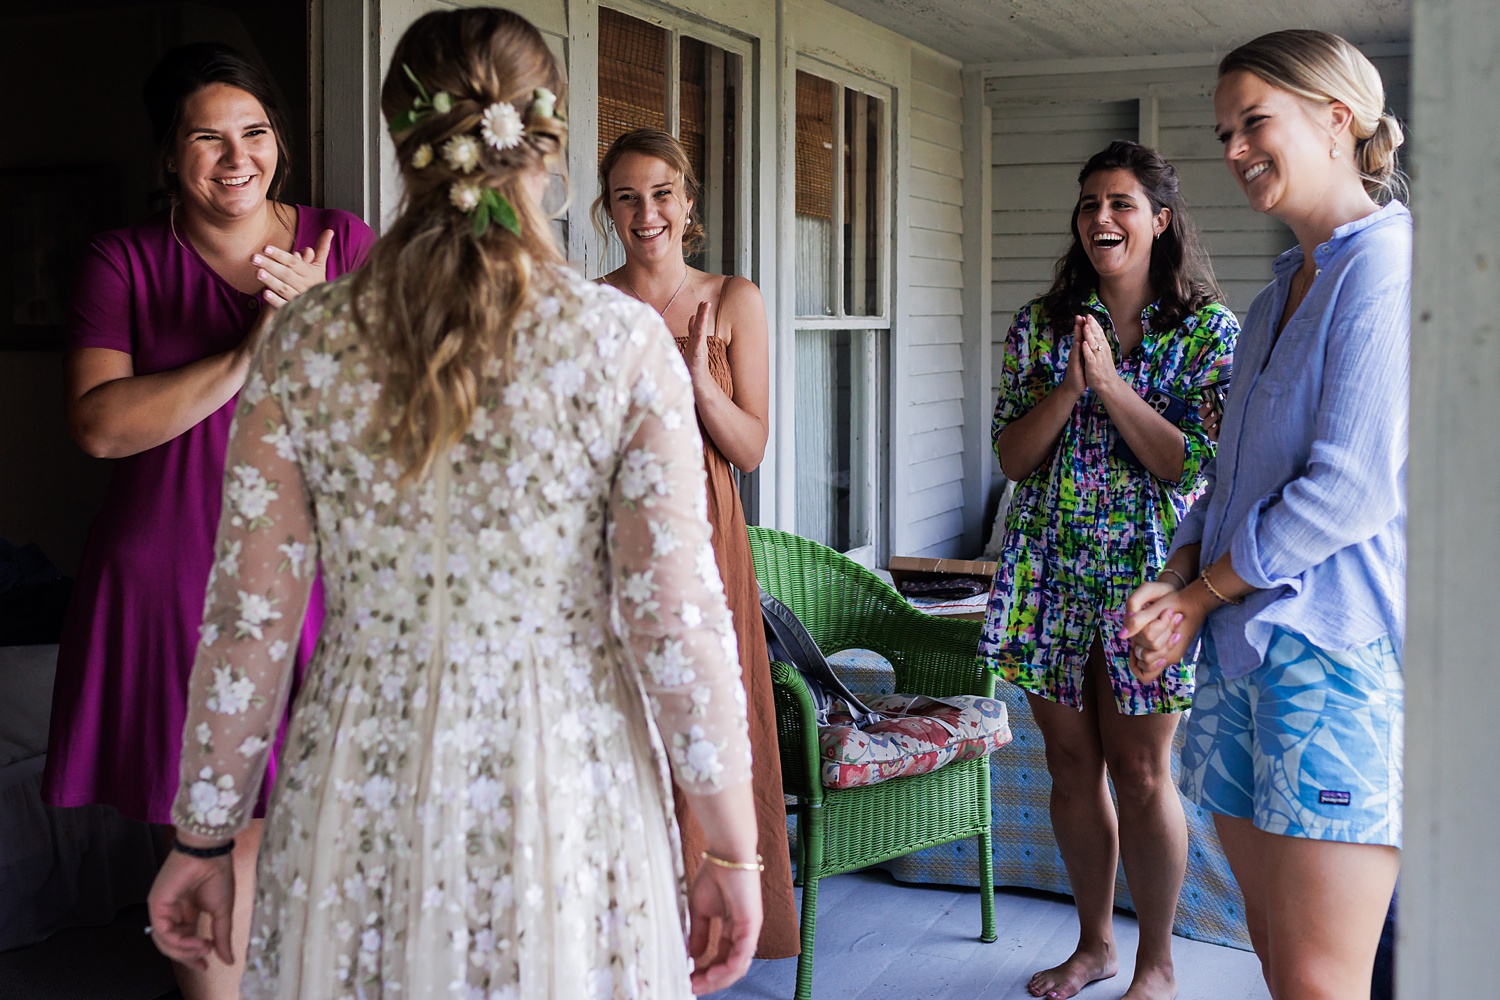 The bride's friends get excited to see their friend ready for the wedding day